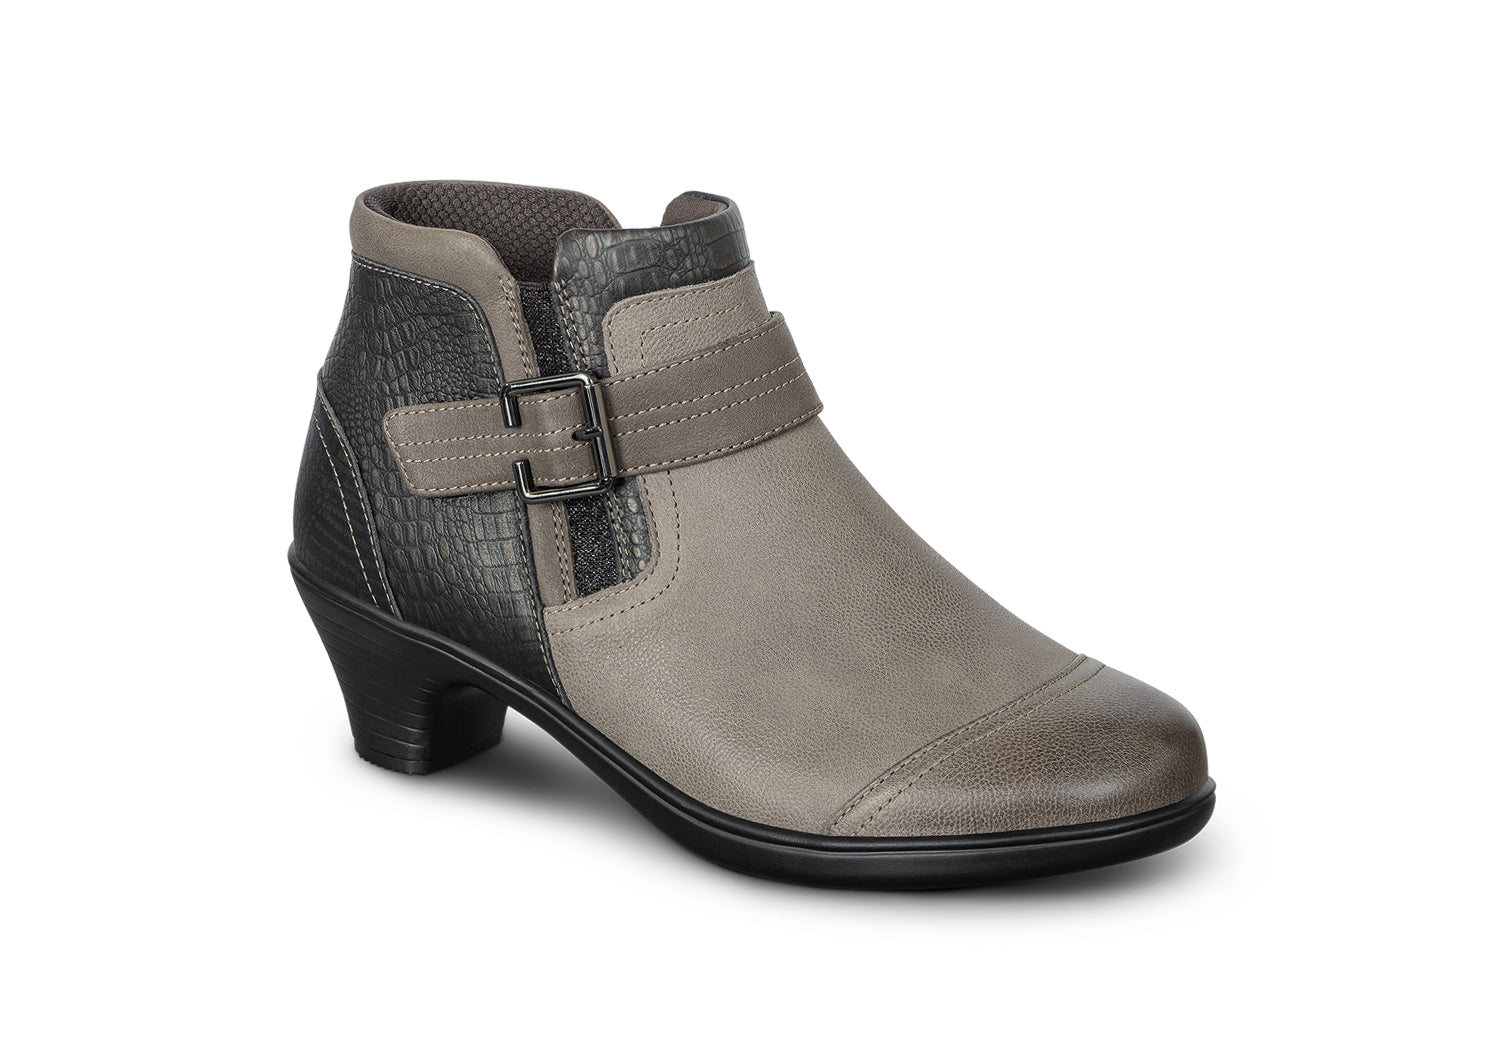 Women's Cowgirl Boots | Ariat